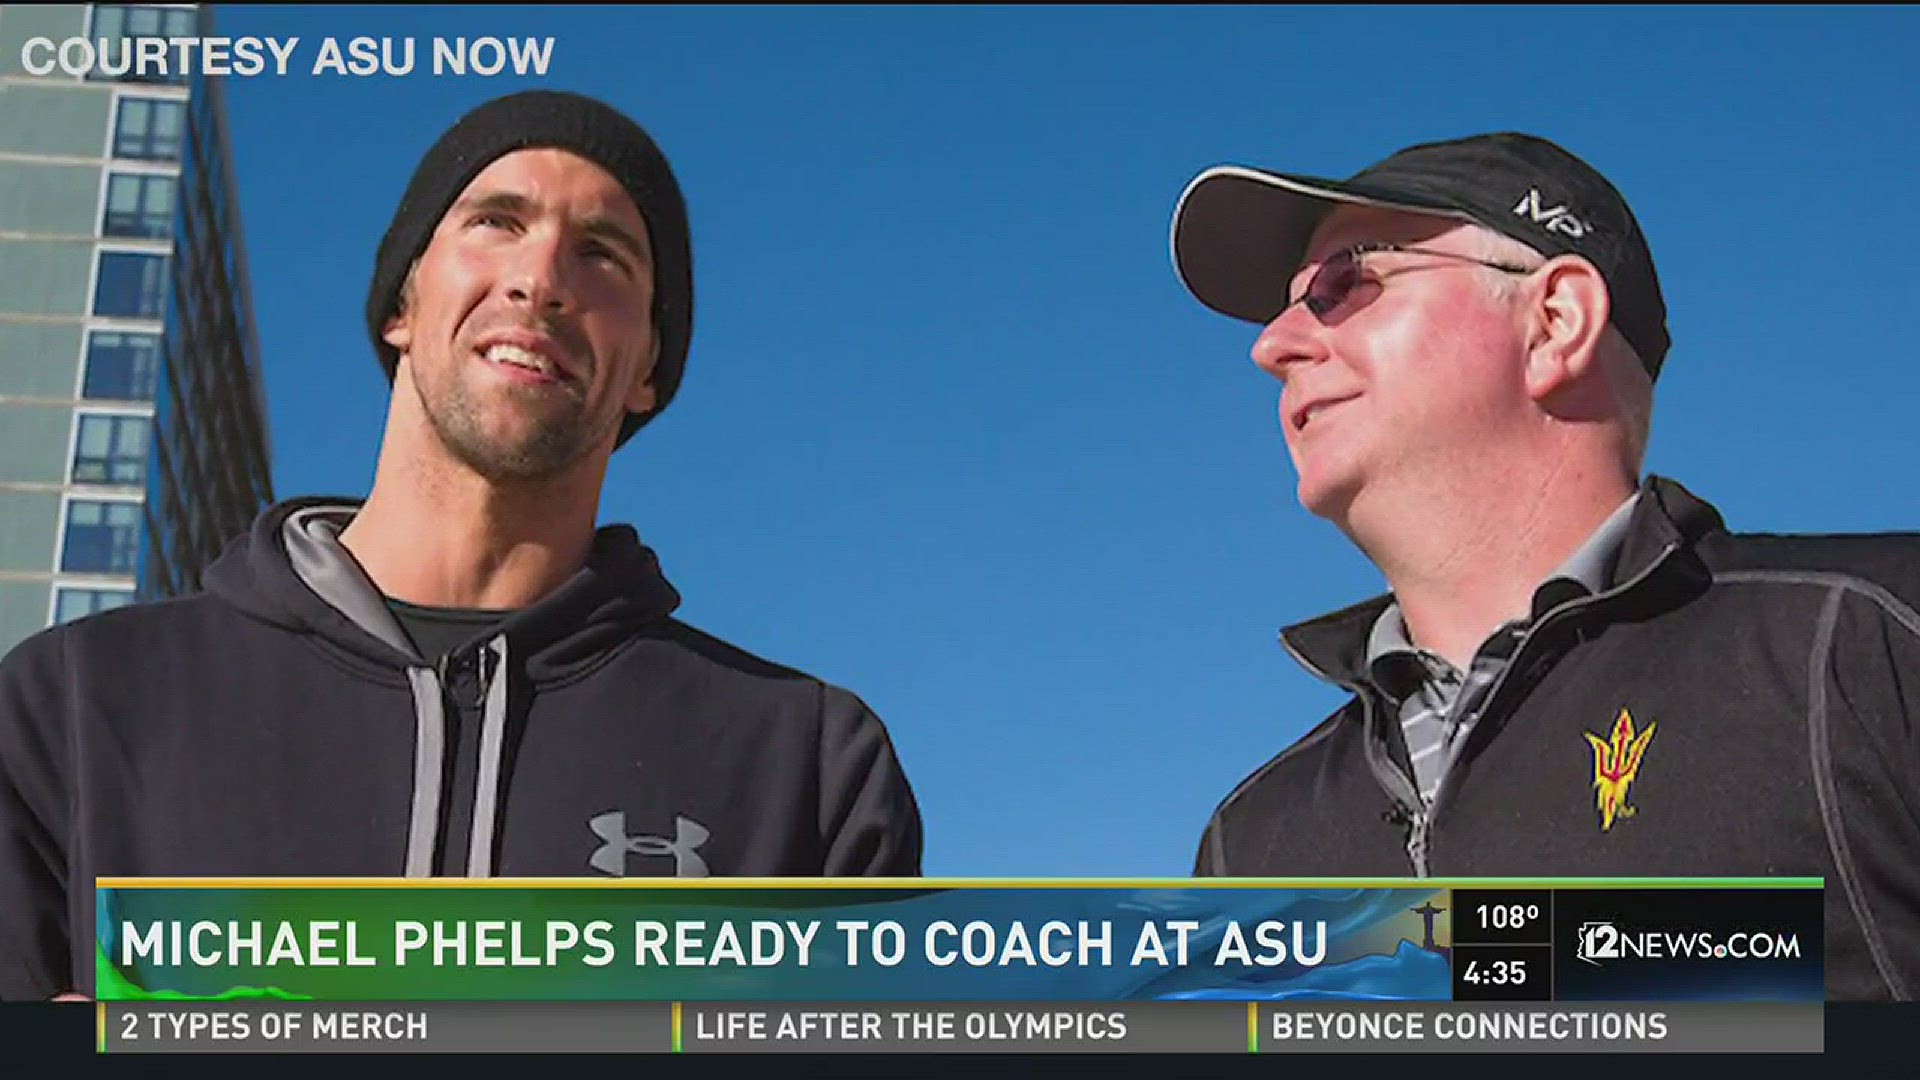 Michael Phelps talks about his coach, his last Olympic competition and next steps.